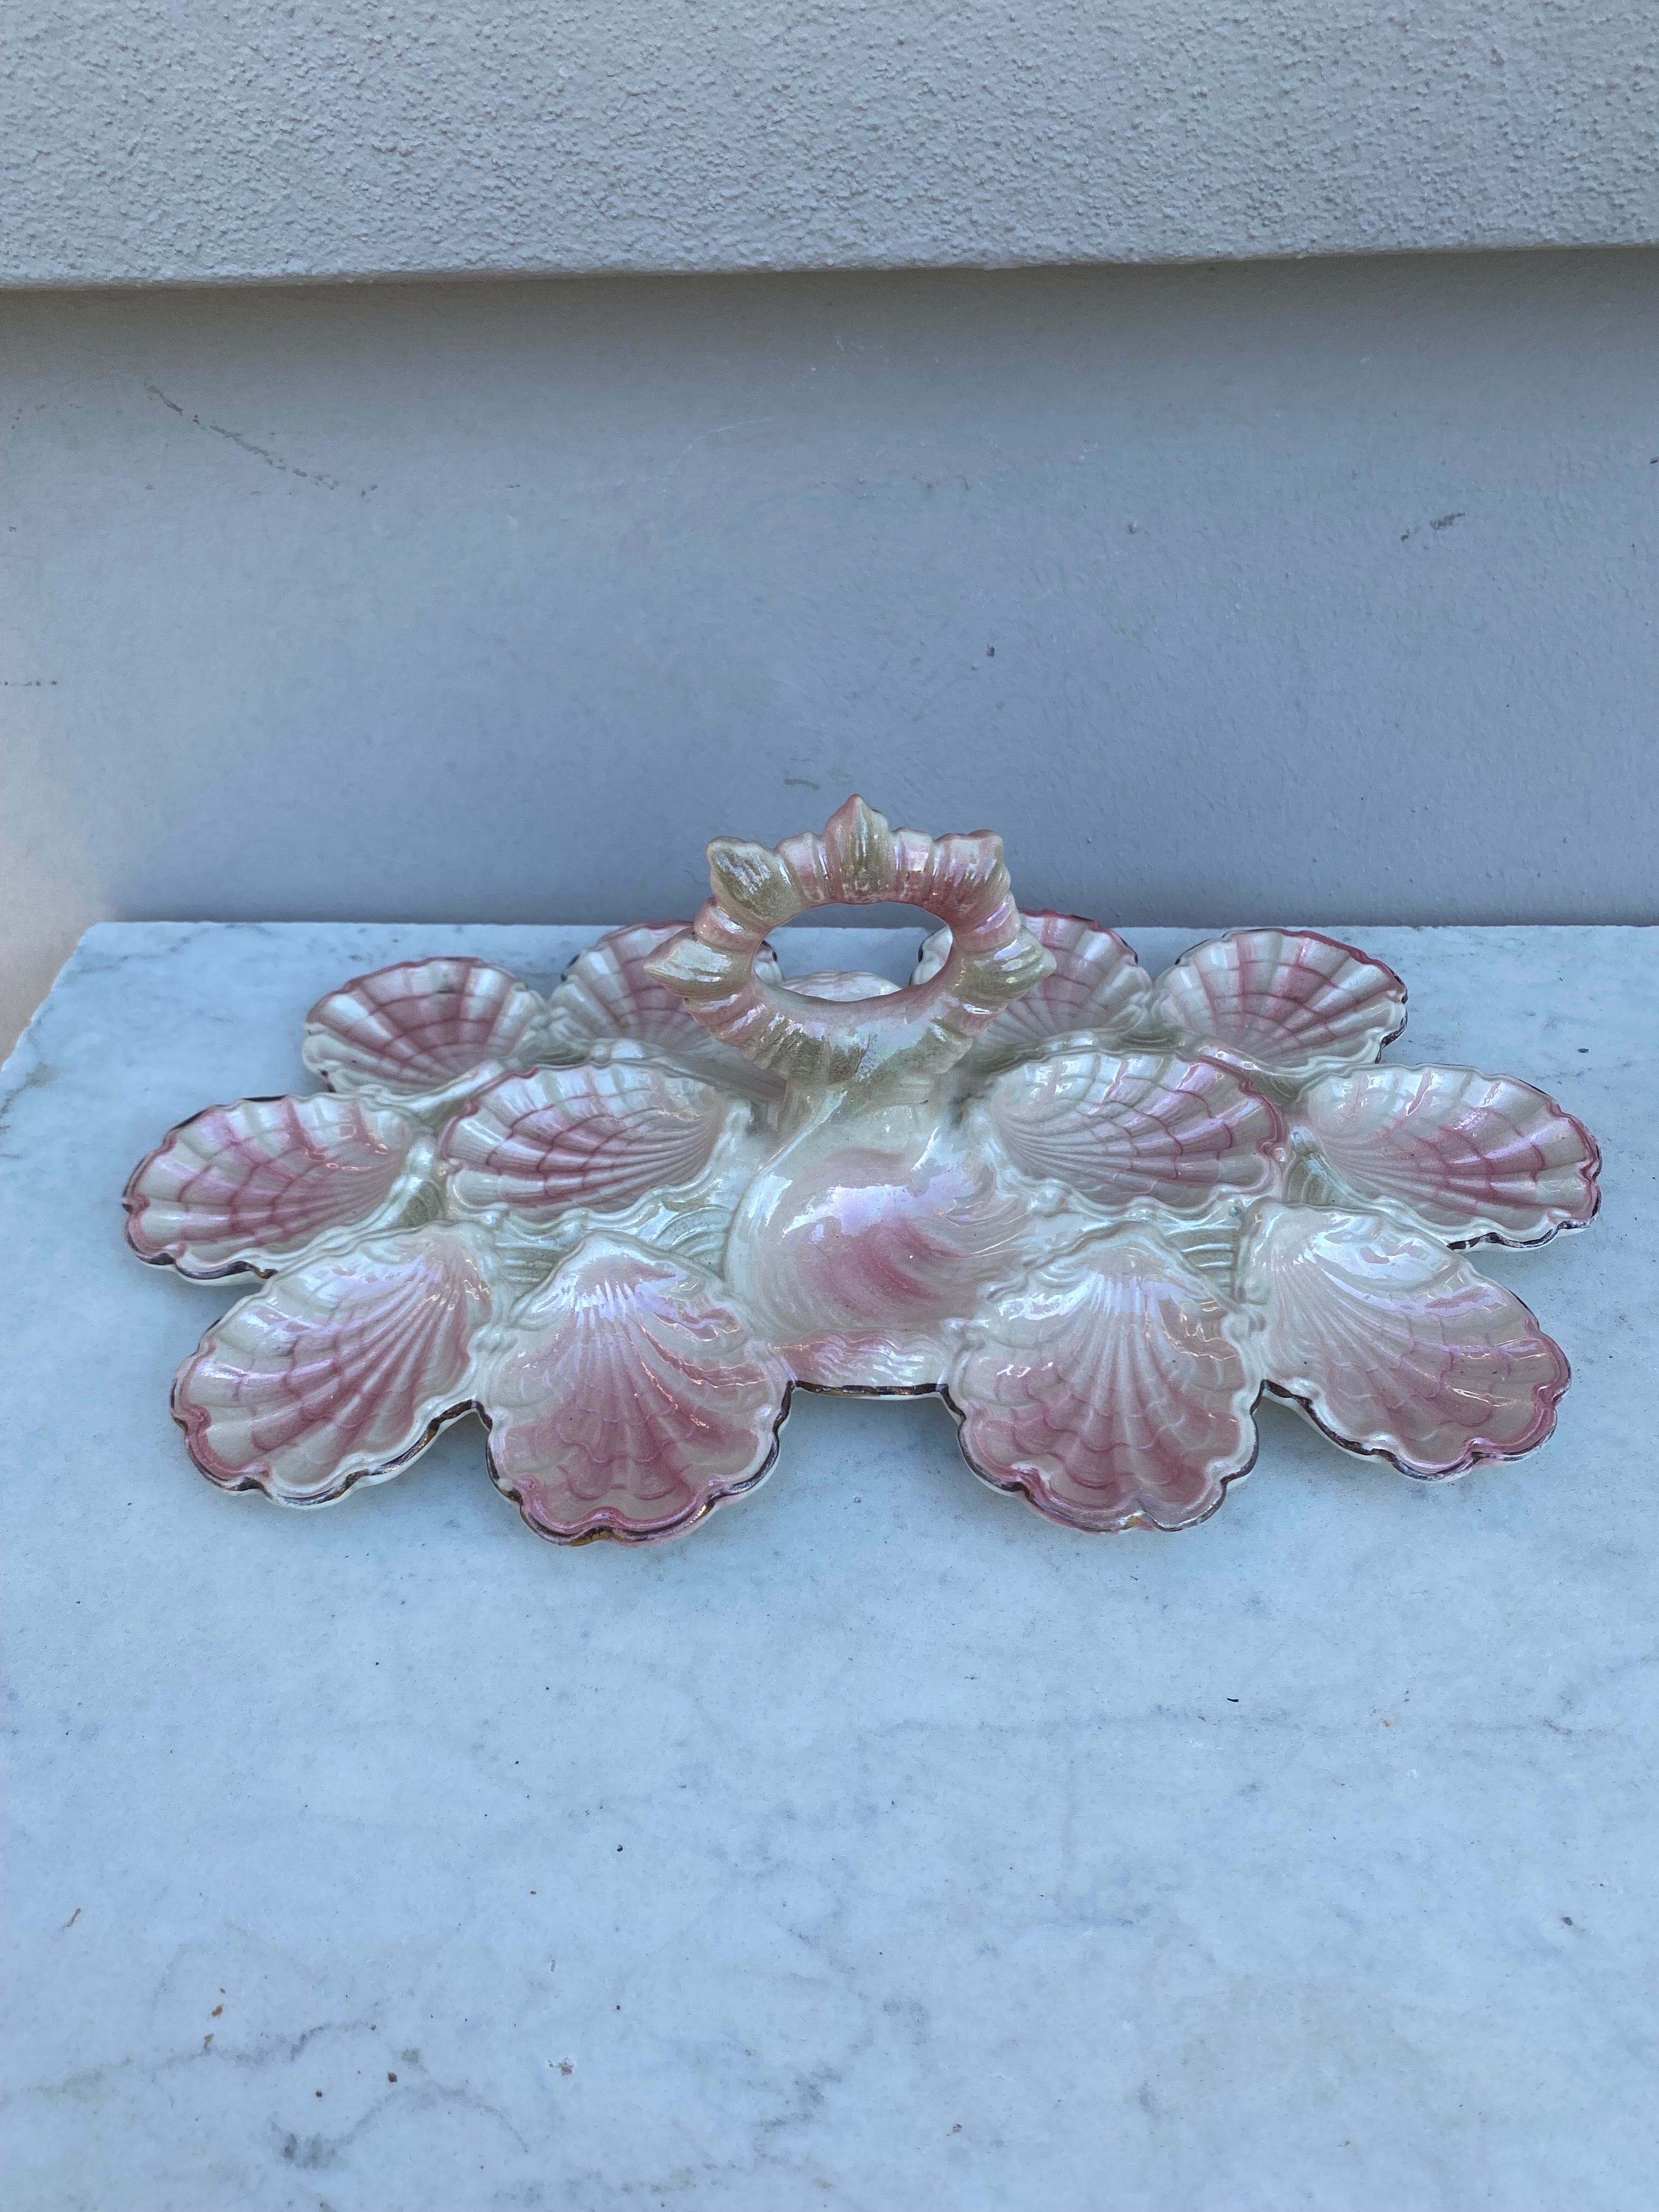 19th Century Rare Majolica Oyster Server Fives Lille.
Very rare pink iridescent color.